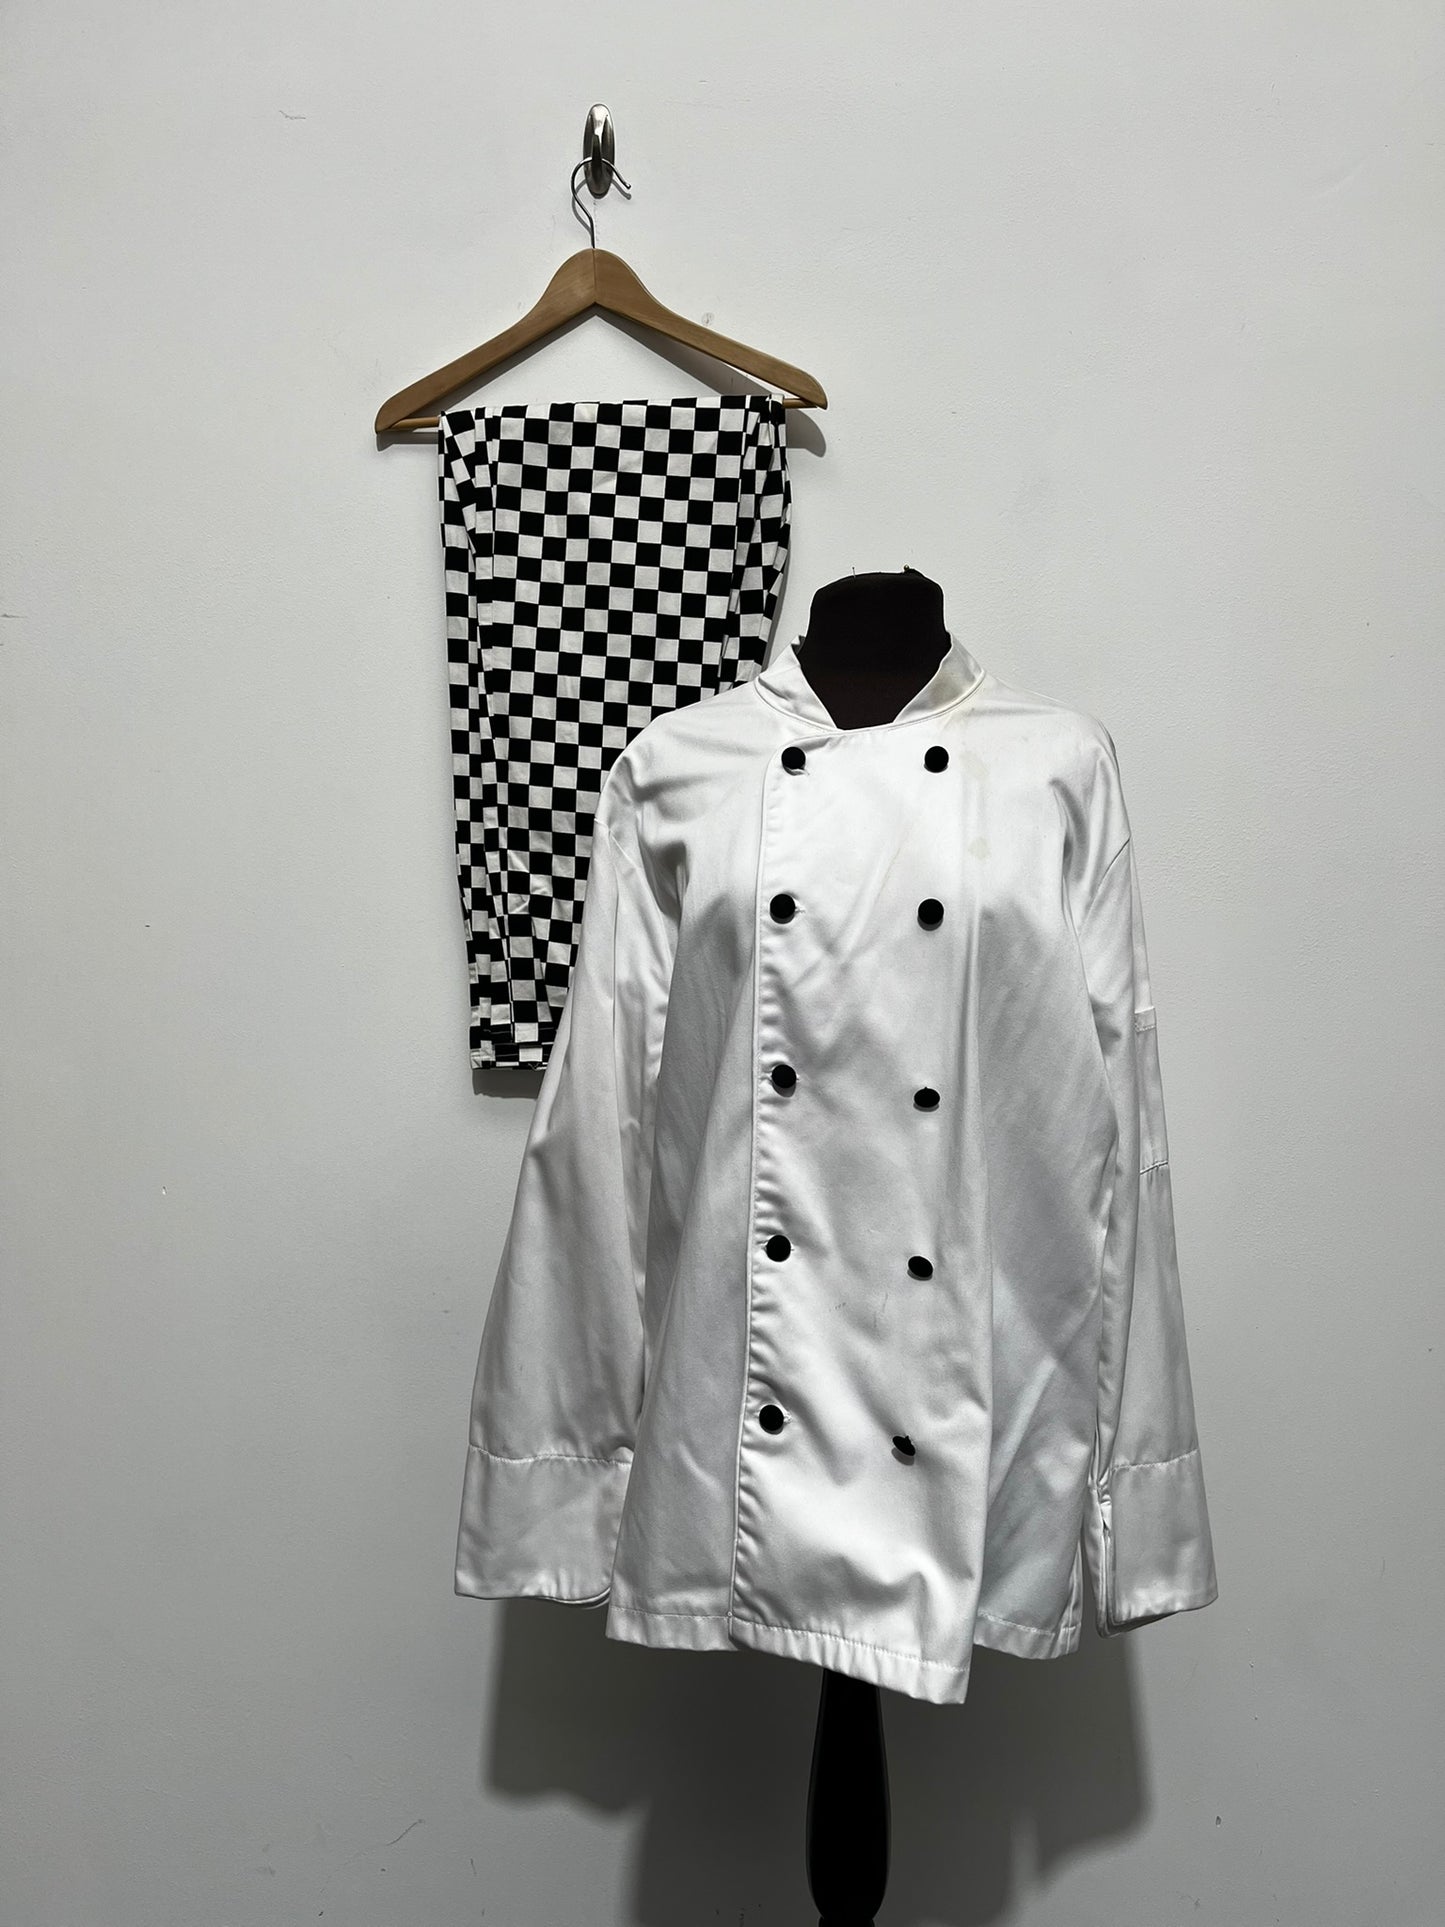 Authentic Chef Whites Uniform in USED Condition Size L/XL